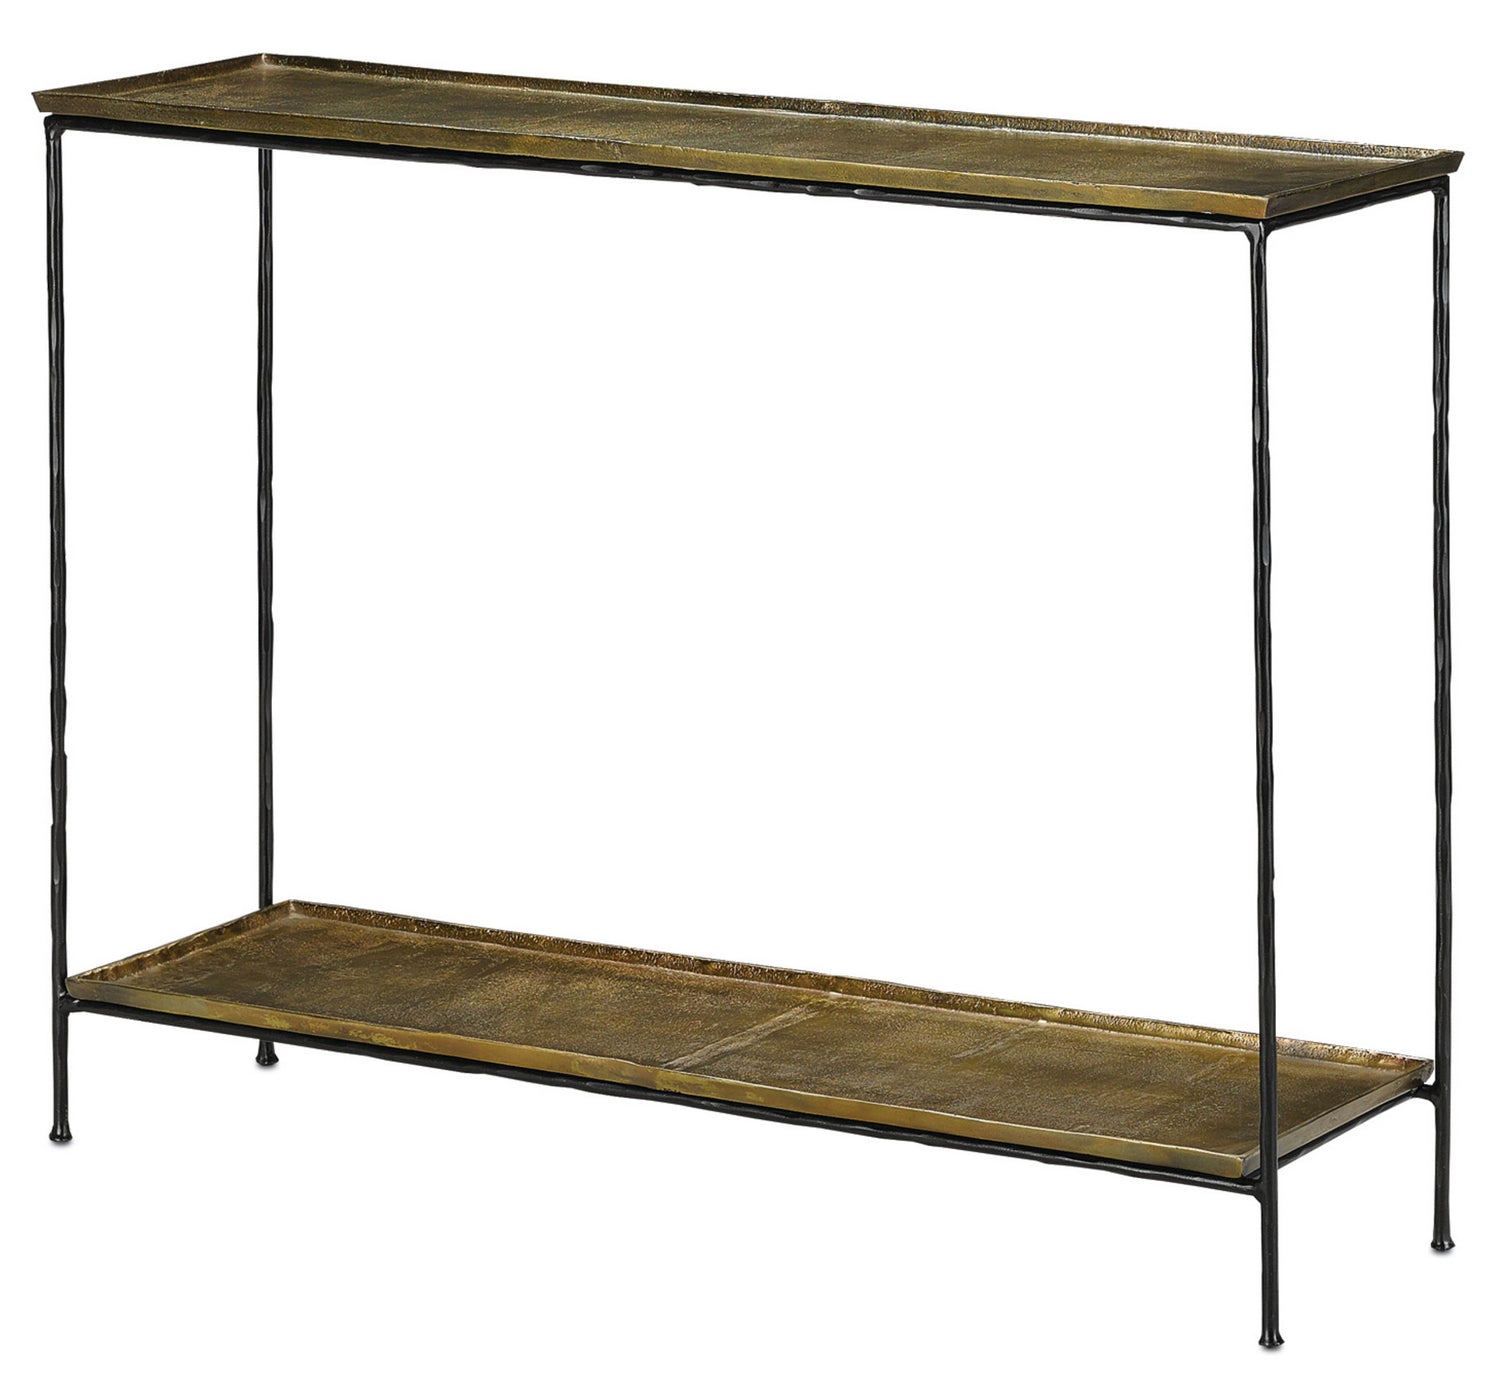 Console Table from the Boyles collection in Black Iron/Antique Brass finish